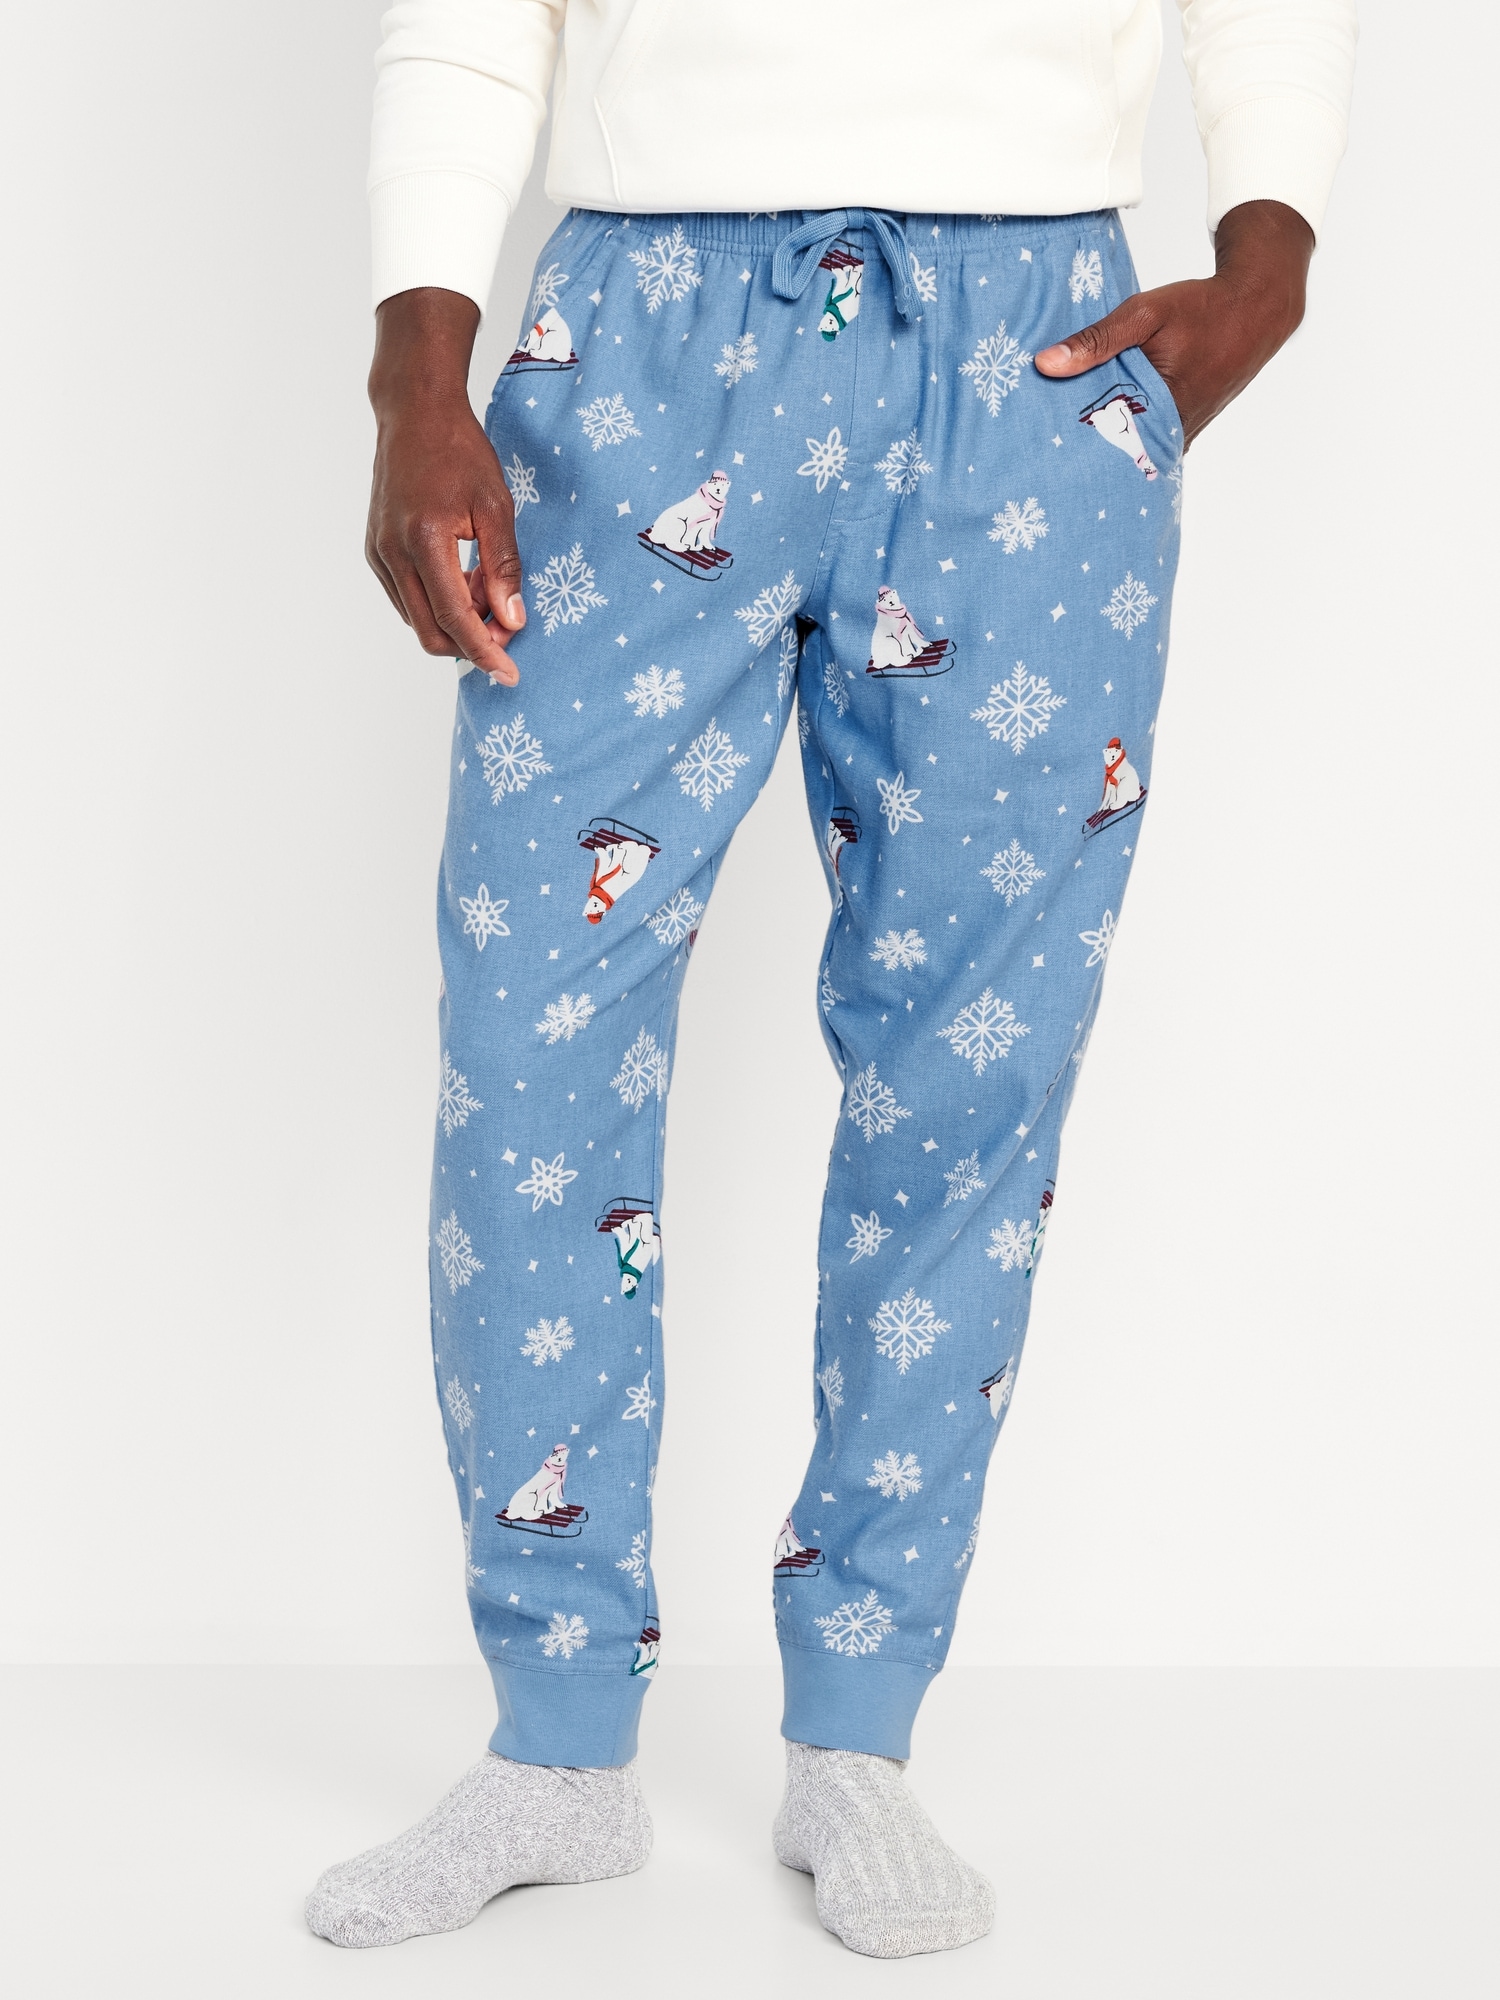 Old Navy Patterned Flannel Jogger Pajama Pants | Old Navy Has the Pajamas  You'll Want to Wear in the Daytime Too | POPSUGAR Fashion UK Photo 4